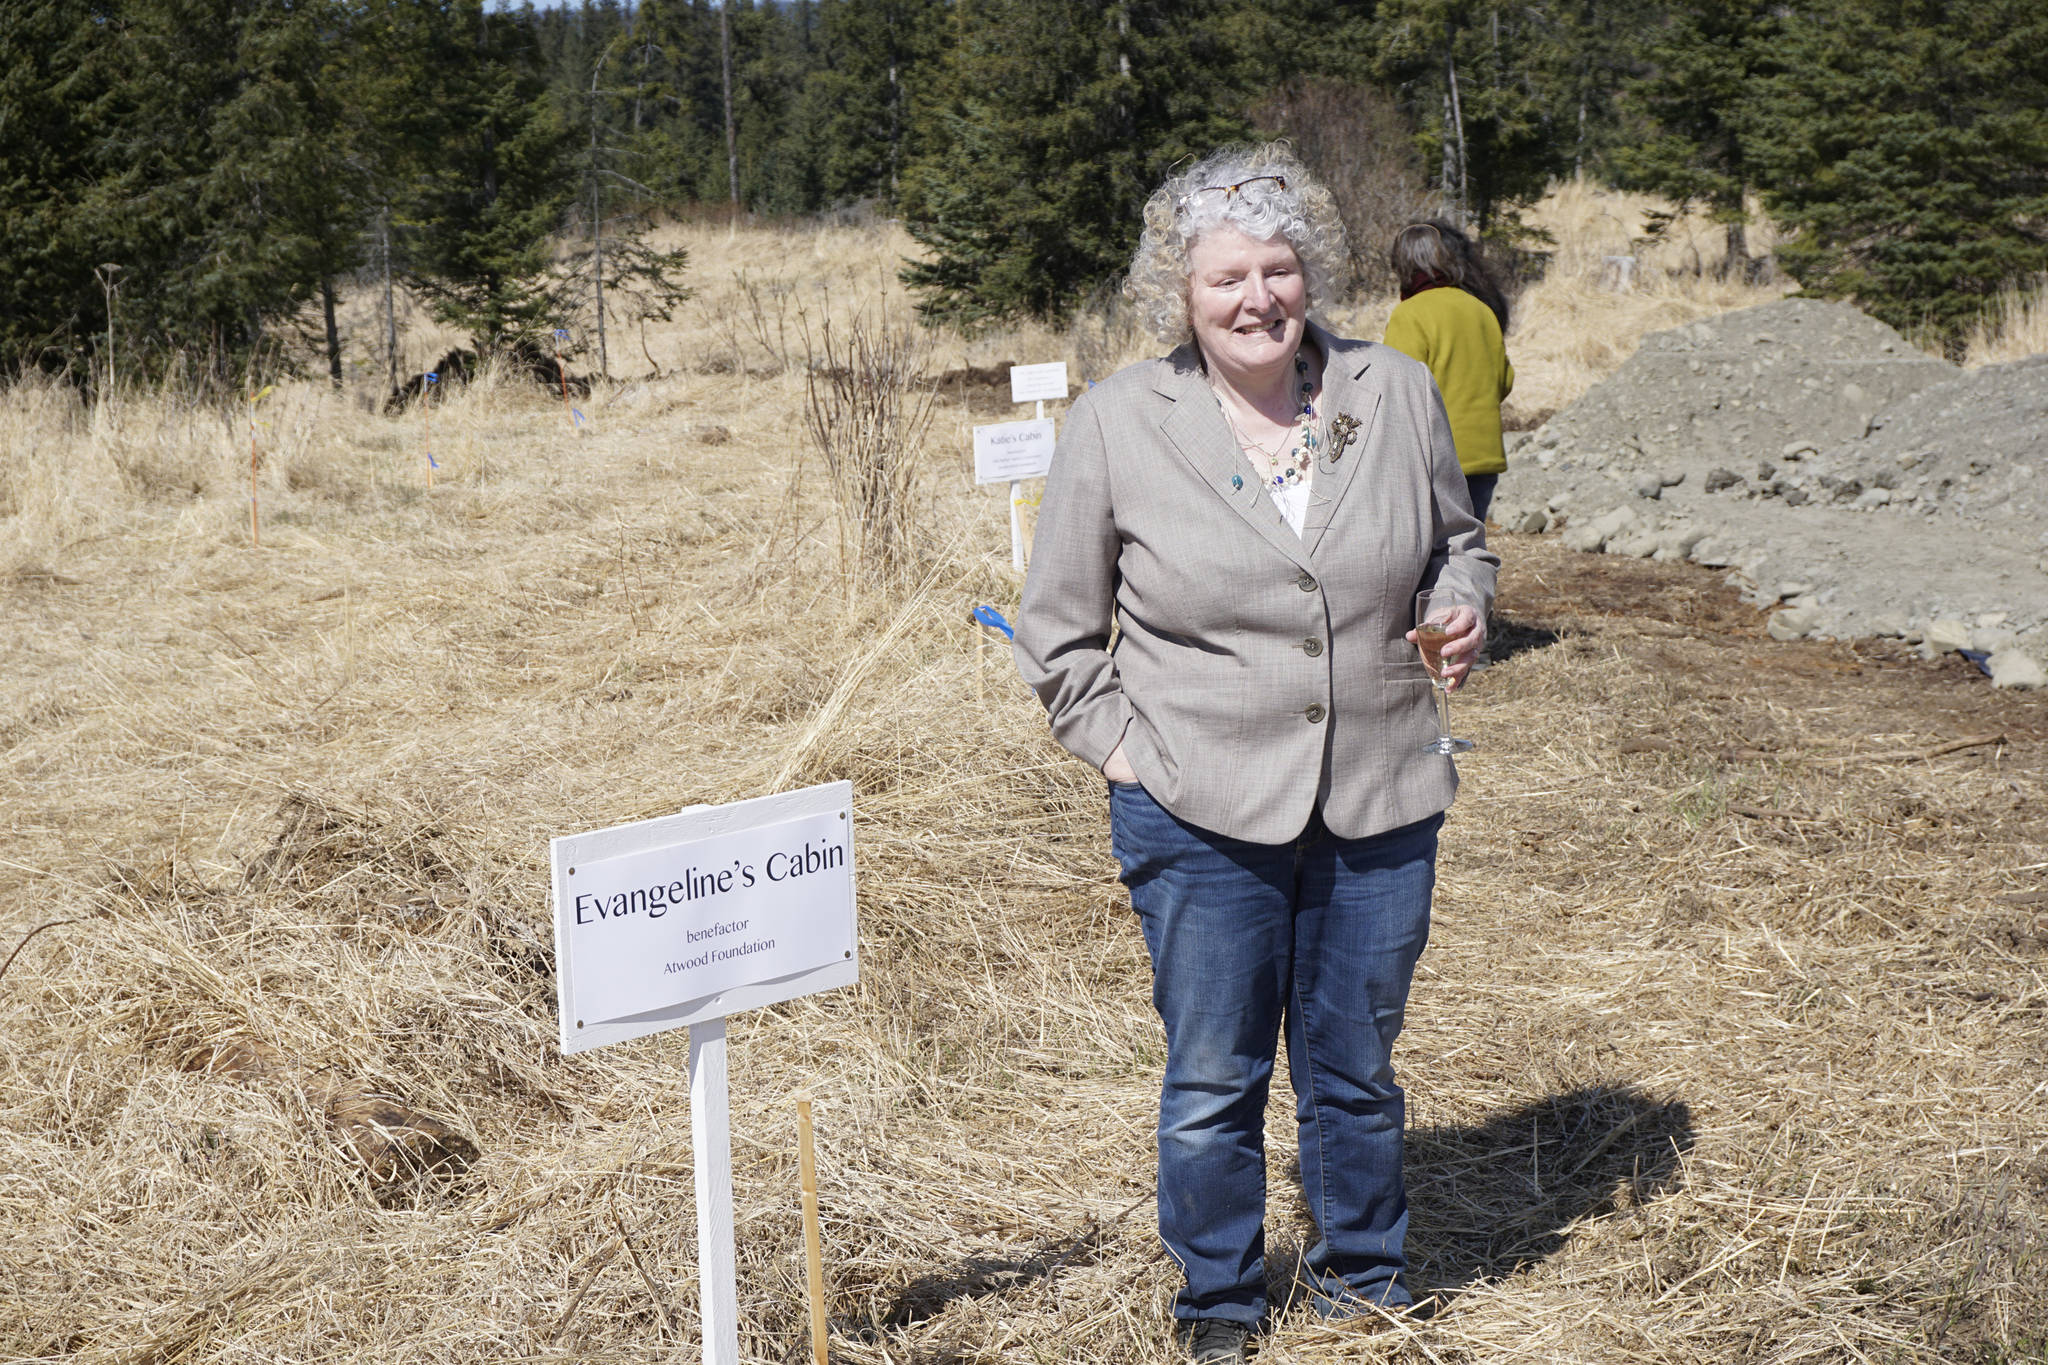 Homer writer and Storyknife Writers Retreat founder Dana Stabenow stands near the site of a cabin at groundbreaking ceremonies on May 4, 2019, at the retreat property in Homer, Alaska. Stabenow will receive the Susan Gibson Community Achievement Award for her work in founding Storyknife, a retreat for women writers. Construction started last year on the main house and cabins that will house visiting women writers. (Photo by Michael Armstrong/Homer News)